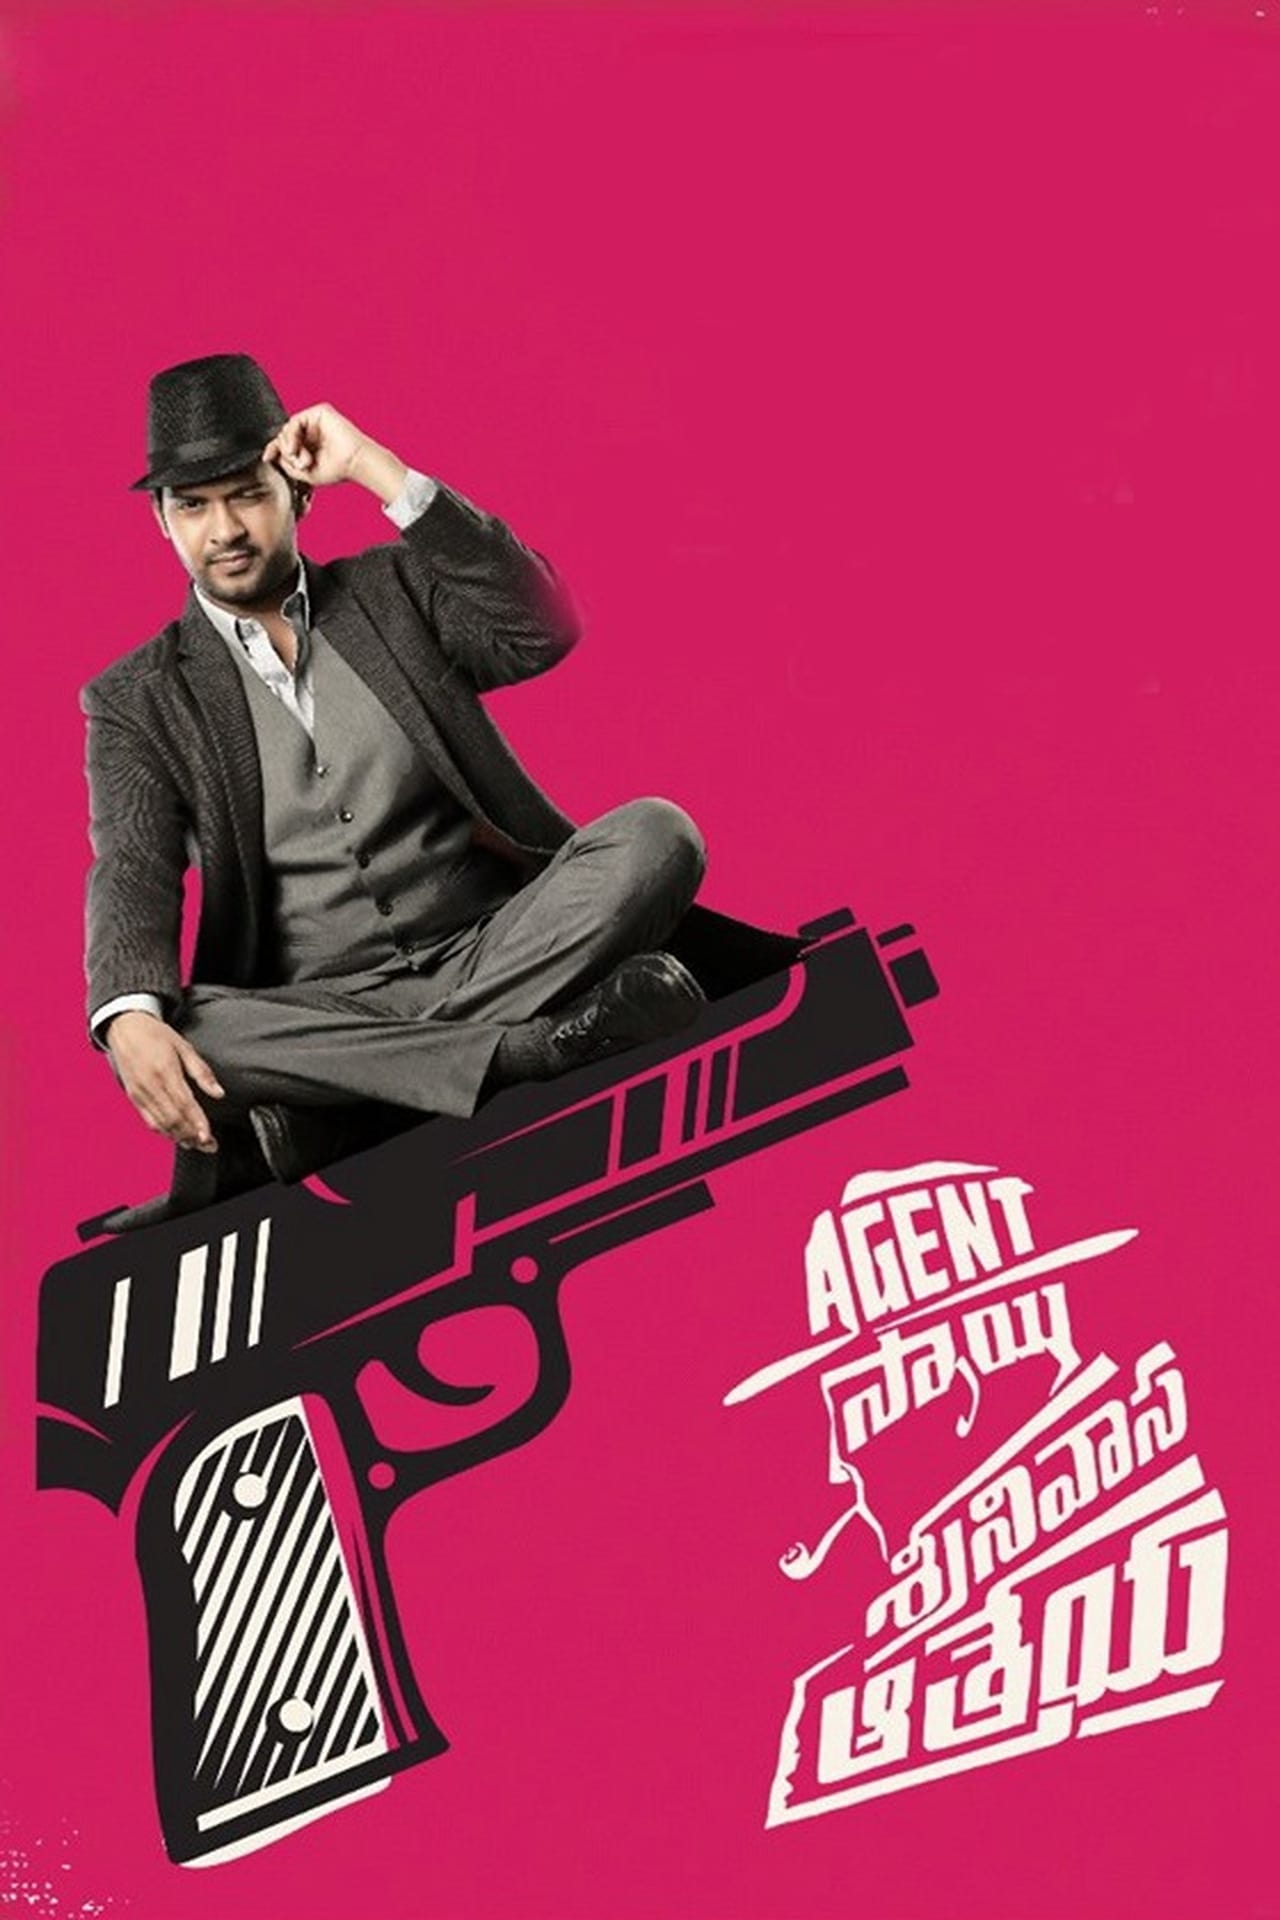 Agent Sai Srinivasa Athreya Wiki Synopsis Reviews Watch And Download Agent sai srinivasa athreya is a brilliant, underrated detective from nellore who runs an agency called fbi which sees no business. agent sai srinivasa athreya wiki